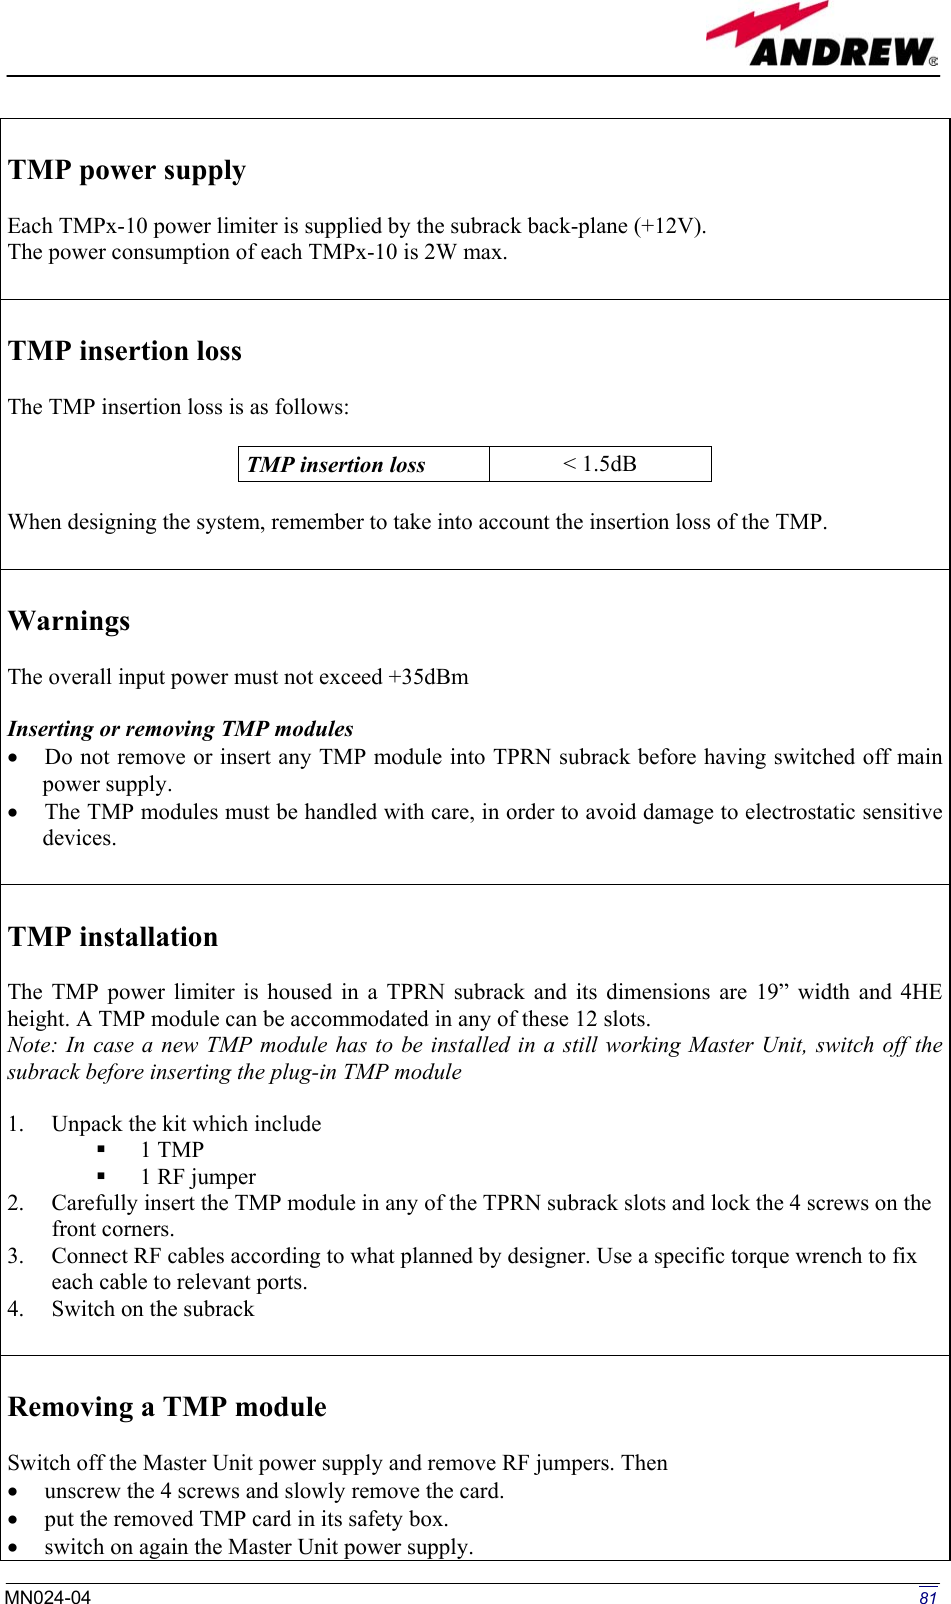   TMP power supply  Each TMPx-10 power limiter is supplied by the subrack back-plane (+12V). The power consumption of each TMPx-10 is 2W max.    TMP insertion loss   The TMP insertion loss is as follows:  TMP insertion loss   &lt; 1.5dB  When designing the system, remember to take into account the insertion loss of the TMP.   Warnings  The overall input power must not exceed +35dBm  Inserting or removing TMP modules •  Do not remove or insert any TMP module into TPRN subrack before having switched off main power supply. •  The TMP modules must be handled with care, in order to avoid damage to electrostatic sensitive devices.   TMP installation  The TMP power limiter is housed in a TPRN subrack and its dimensions are 19” width and 4HE height. A TMP module can be accommodated in any of these 12 slots. Note: In case a new TMP module has to be installed in a still working Master Unit, switch off the subrack before inserting the plug-in TMP module  1.  Unpack the kit which include   1 TMP   1 RF jumper 2.  Carefully insert the TMP module in any of the TPRN subrack slots and lock the 4 screws on the front corners. 3.  Connect RF cables according to what planned by designer. Use a specific torque wrench to fix each cable to relevant ports. 4.  Switch on the subrack   Removing a TMP module  Switch off the Master Unit power supply and remove RF jumpers. Then  •  unscrew the 4 screws and slowly remove the card. •  put the removed TMP card in its safety box. •  switch on again the Master Unit power supply.  81MN024-04  